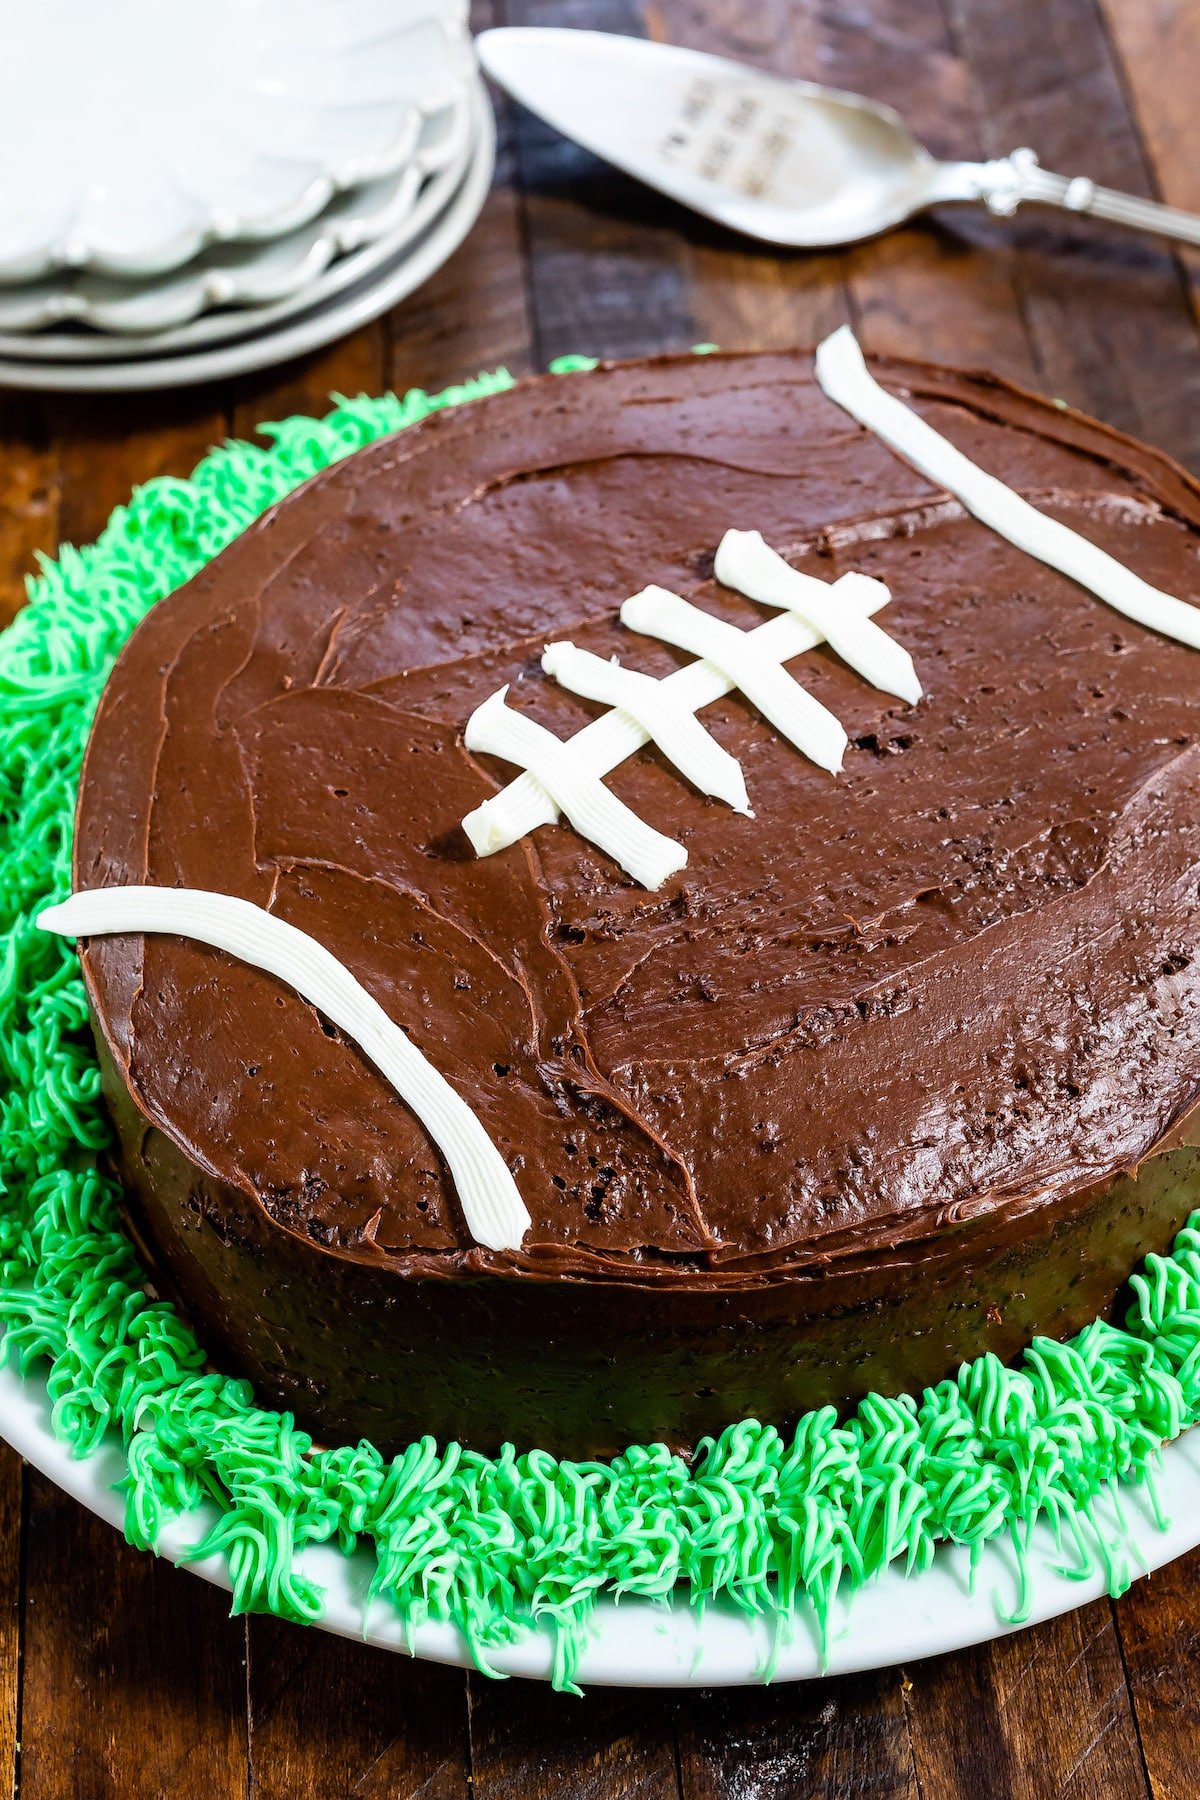 cake on plate decorated like football with green frosting like grass on wood background